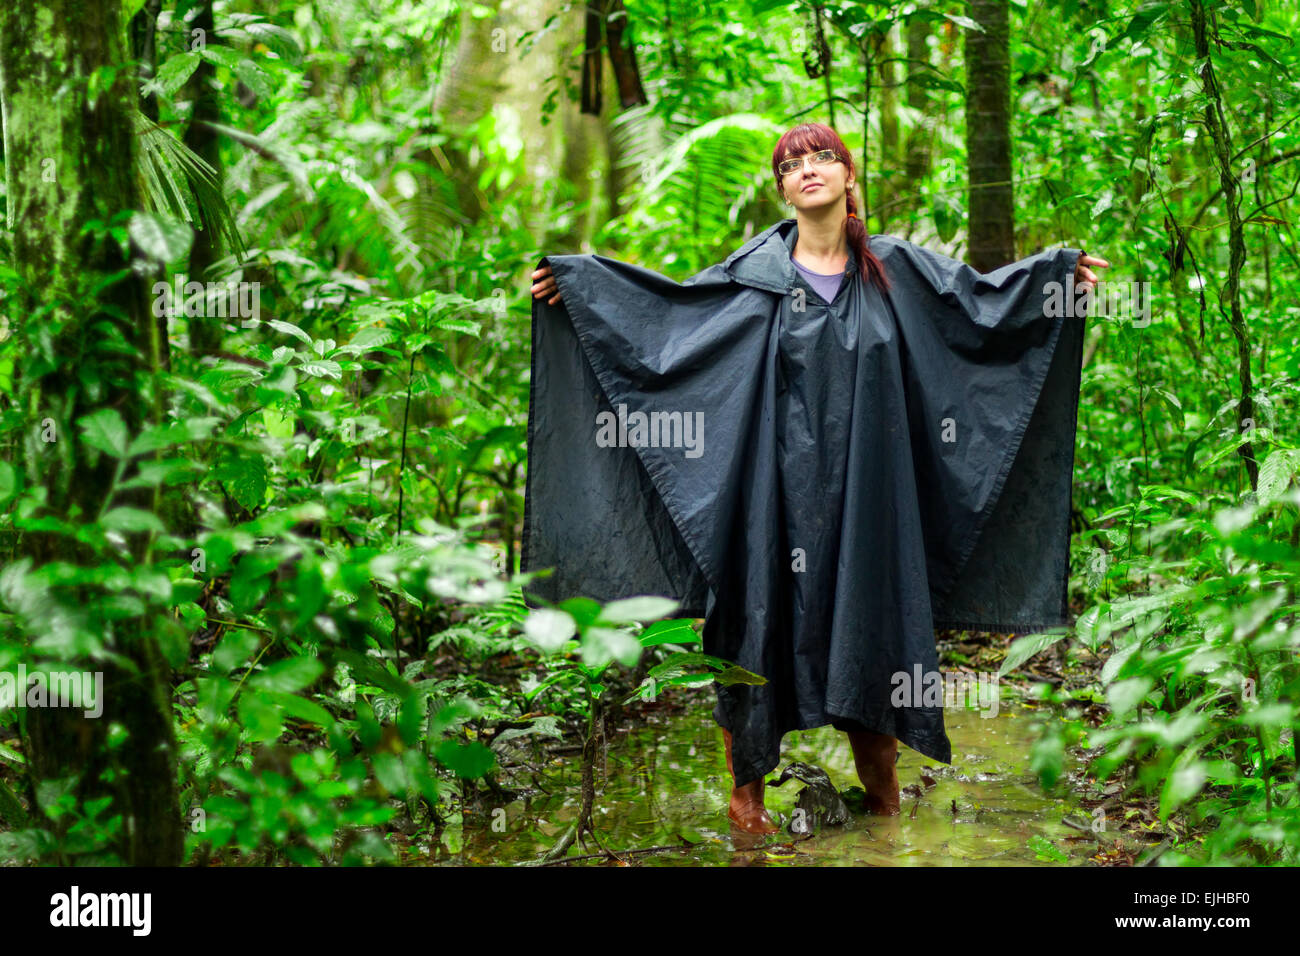 Tourist Woman Into Amazon Jungle Showing Of Typical Equipment And Clothing  For This Environments Rain Poncho And Rubber Boots Stock Photo - Alamy